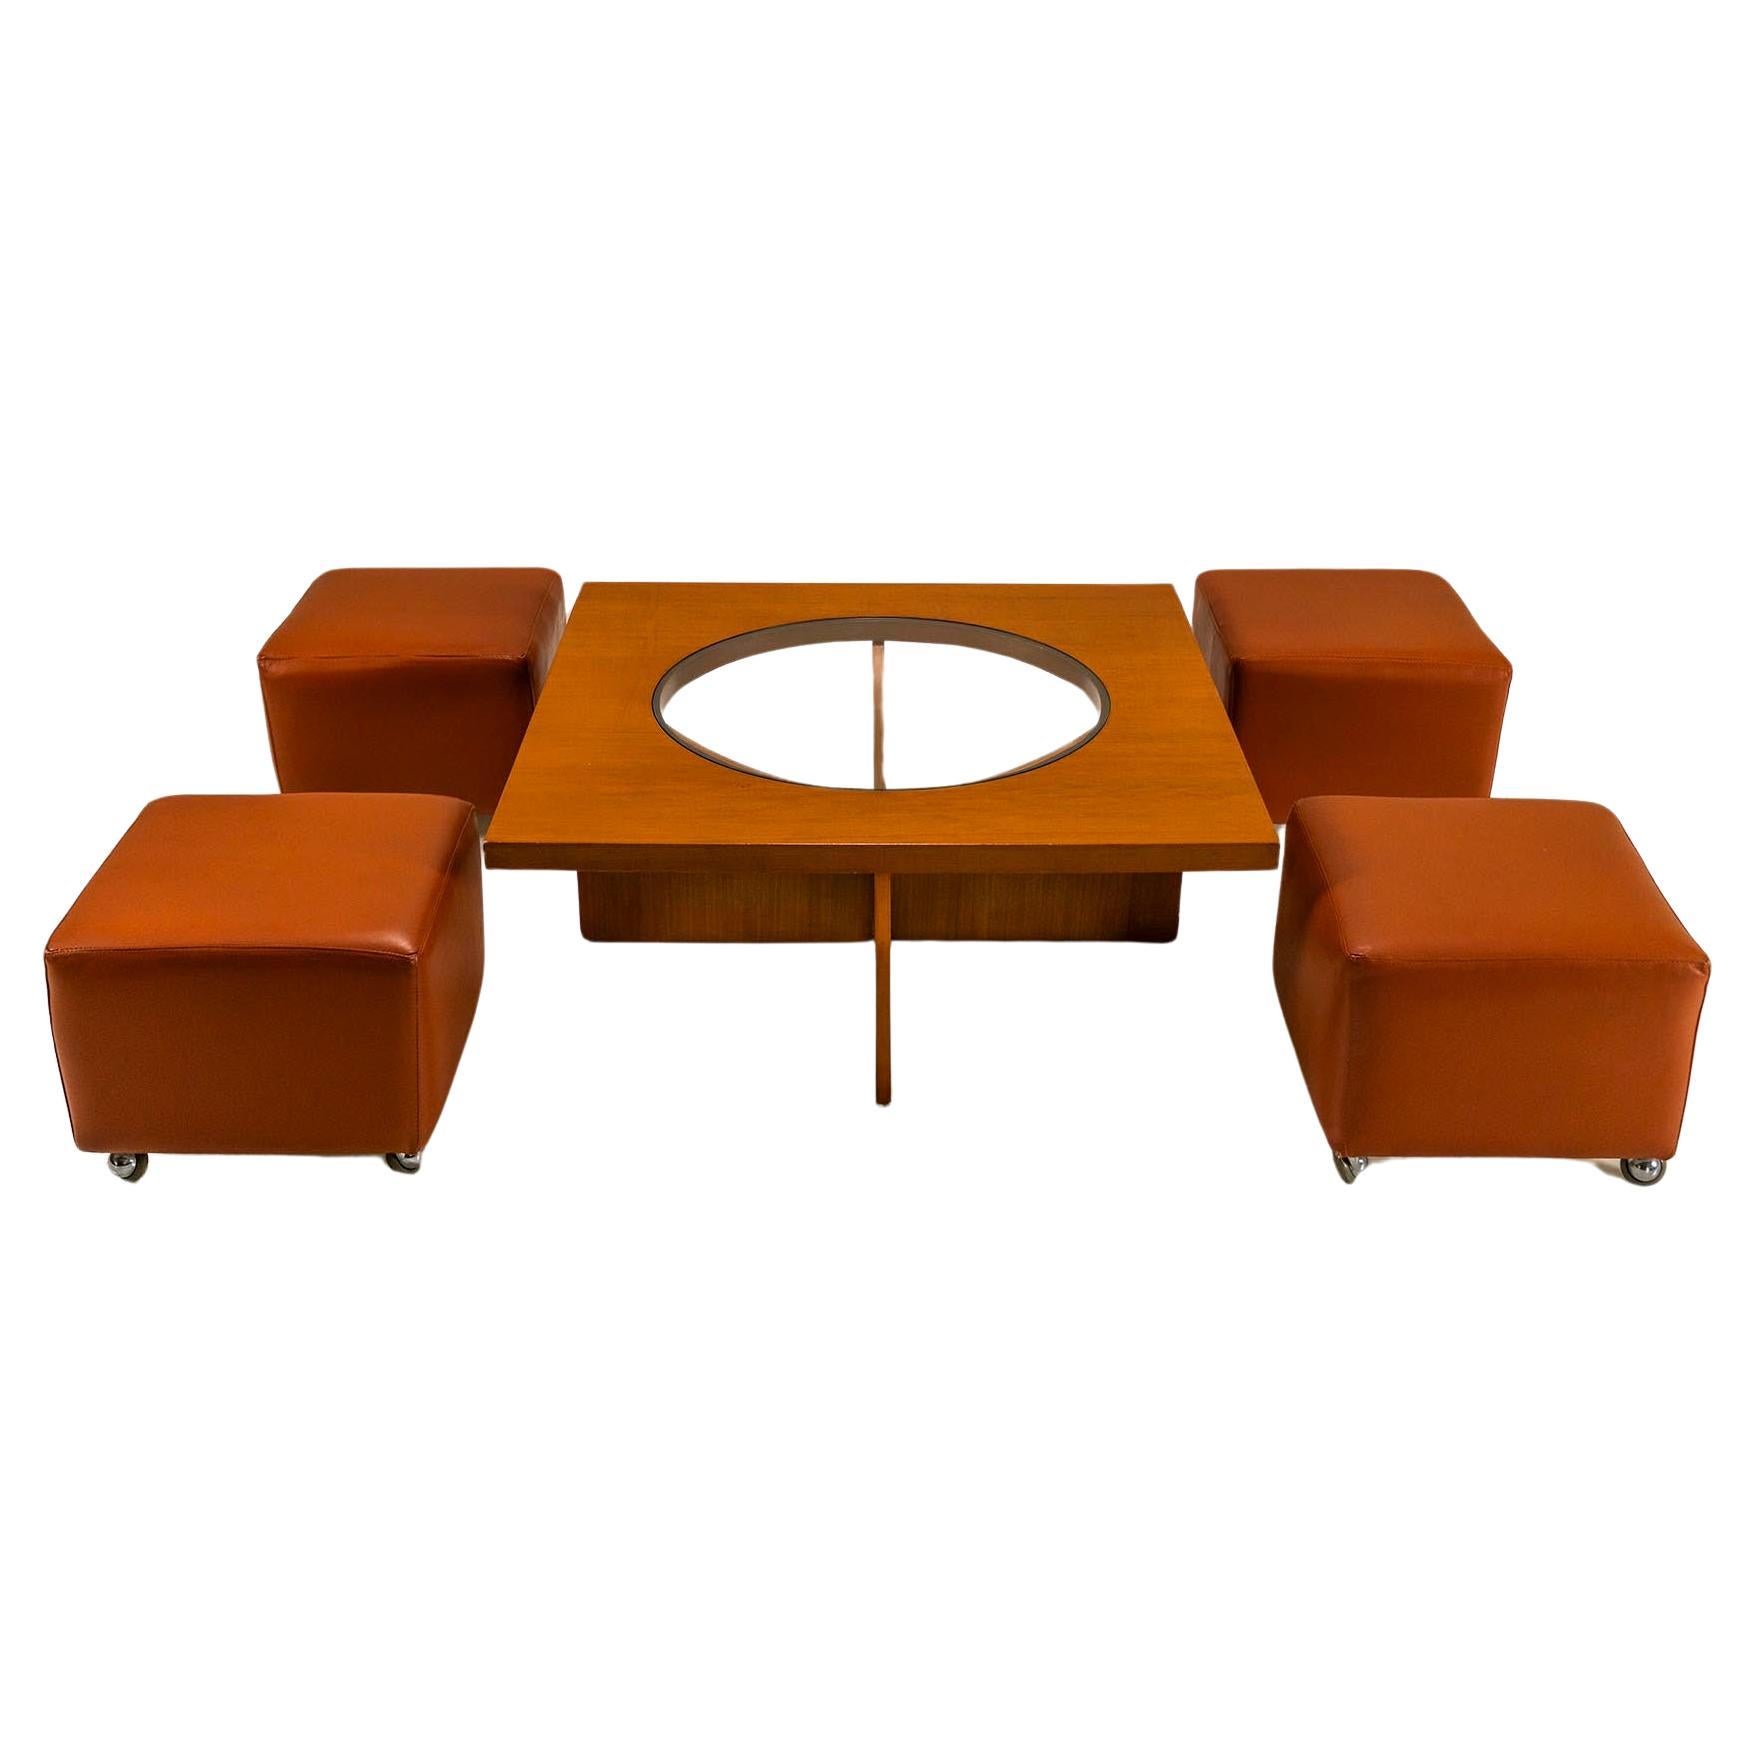 Coffee Table In Cherry Wood With Four Faux Mobile Poufs, Italy 1970's For Sale